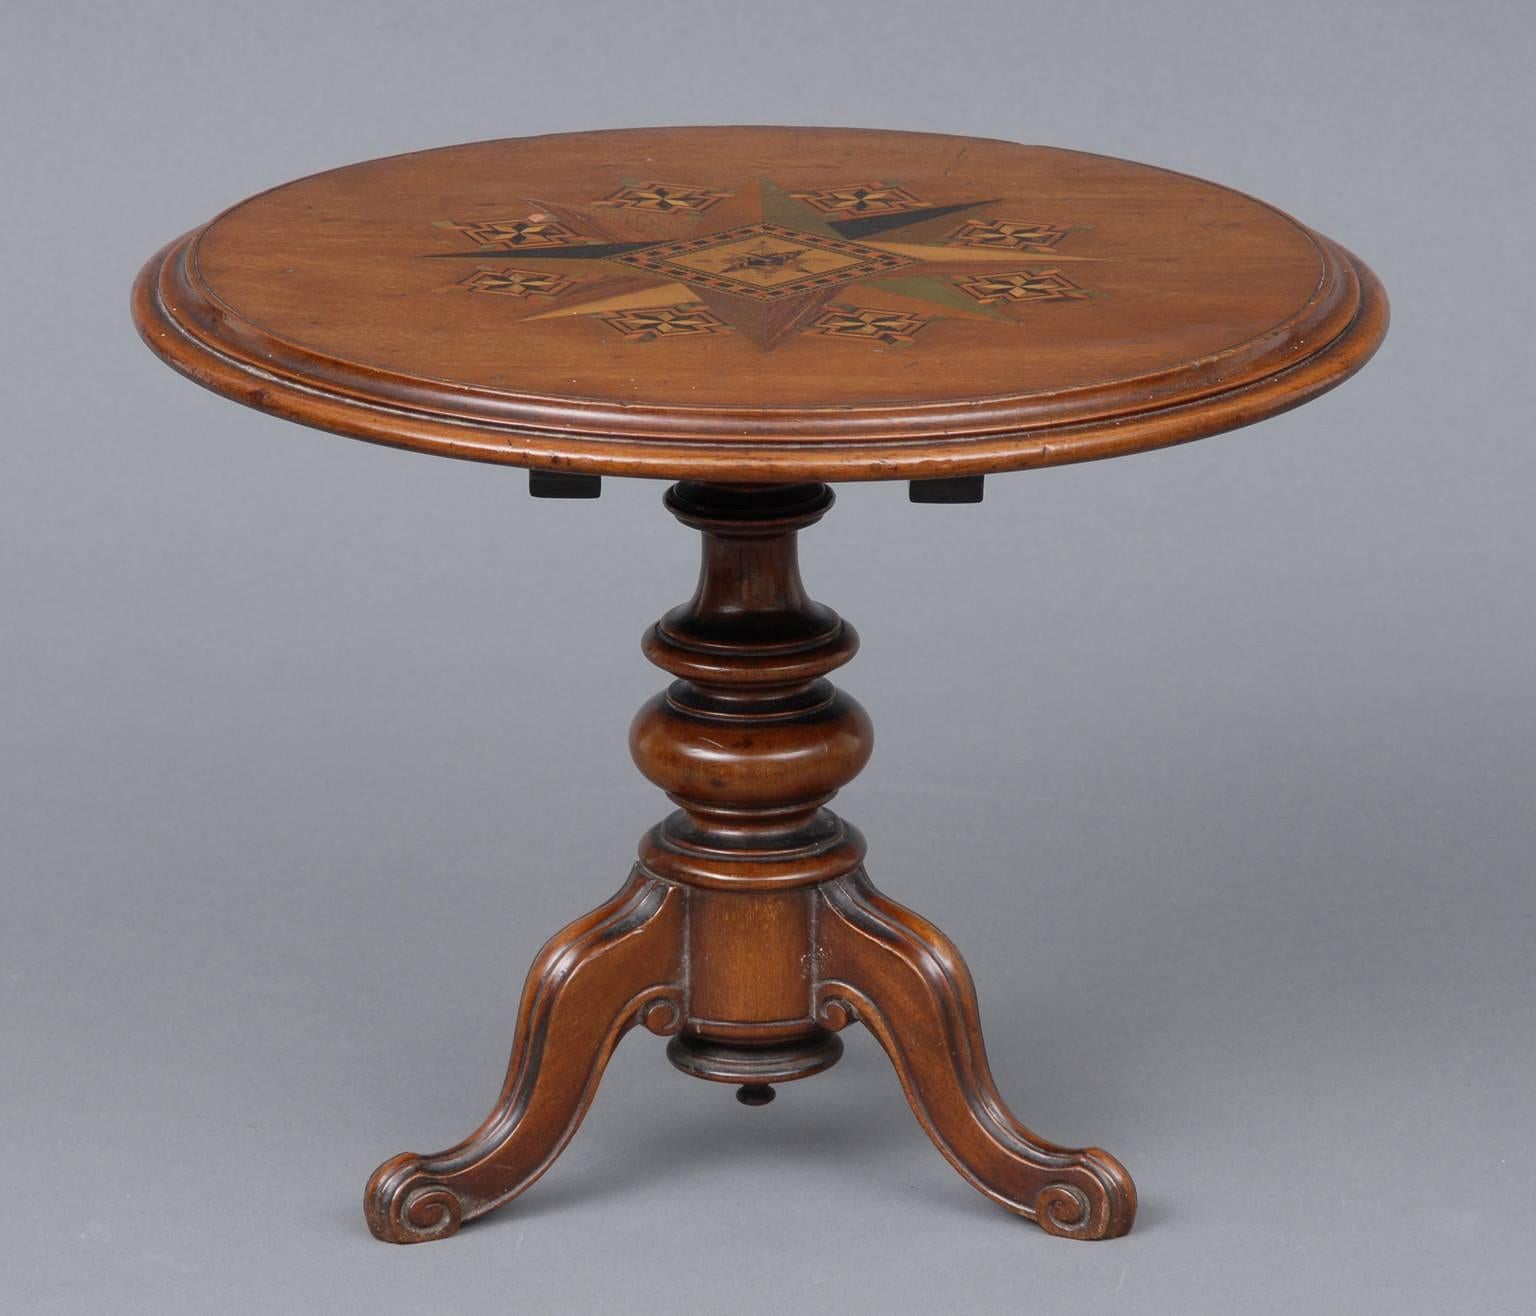 Miniature Victorian Tunbridge ware mahogany tilt-top table inlaid with an eight point star mosaic, on bulbous turned pedestal on molded tripod base ending in scroll feet. Item #6685.